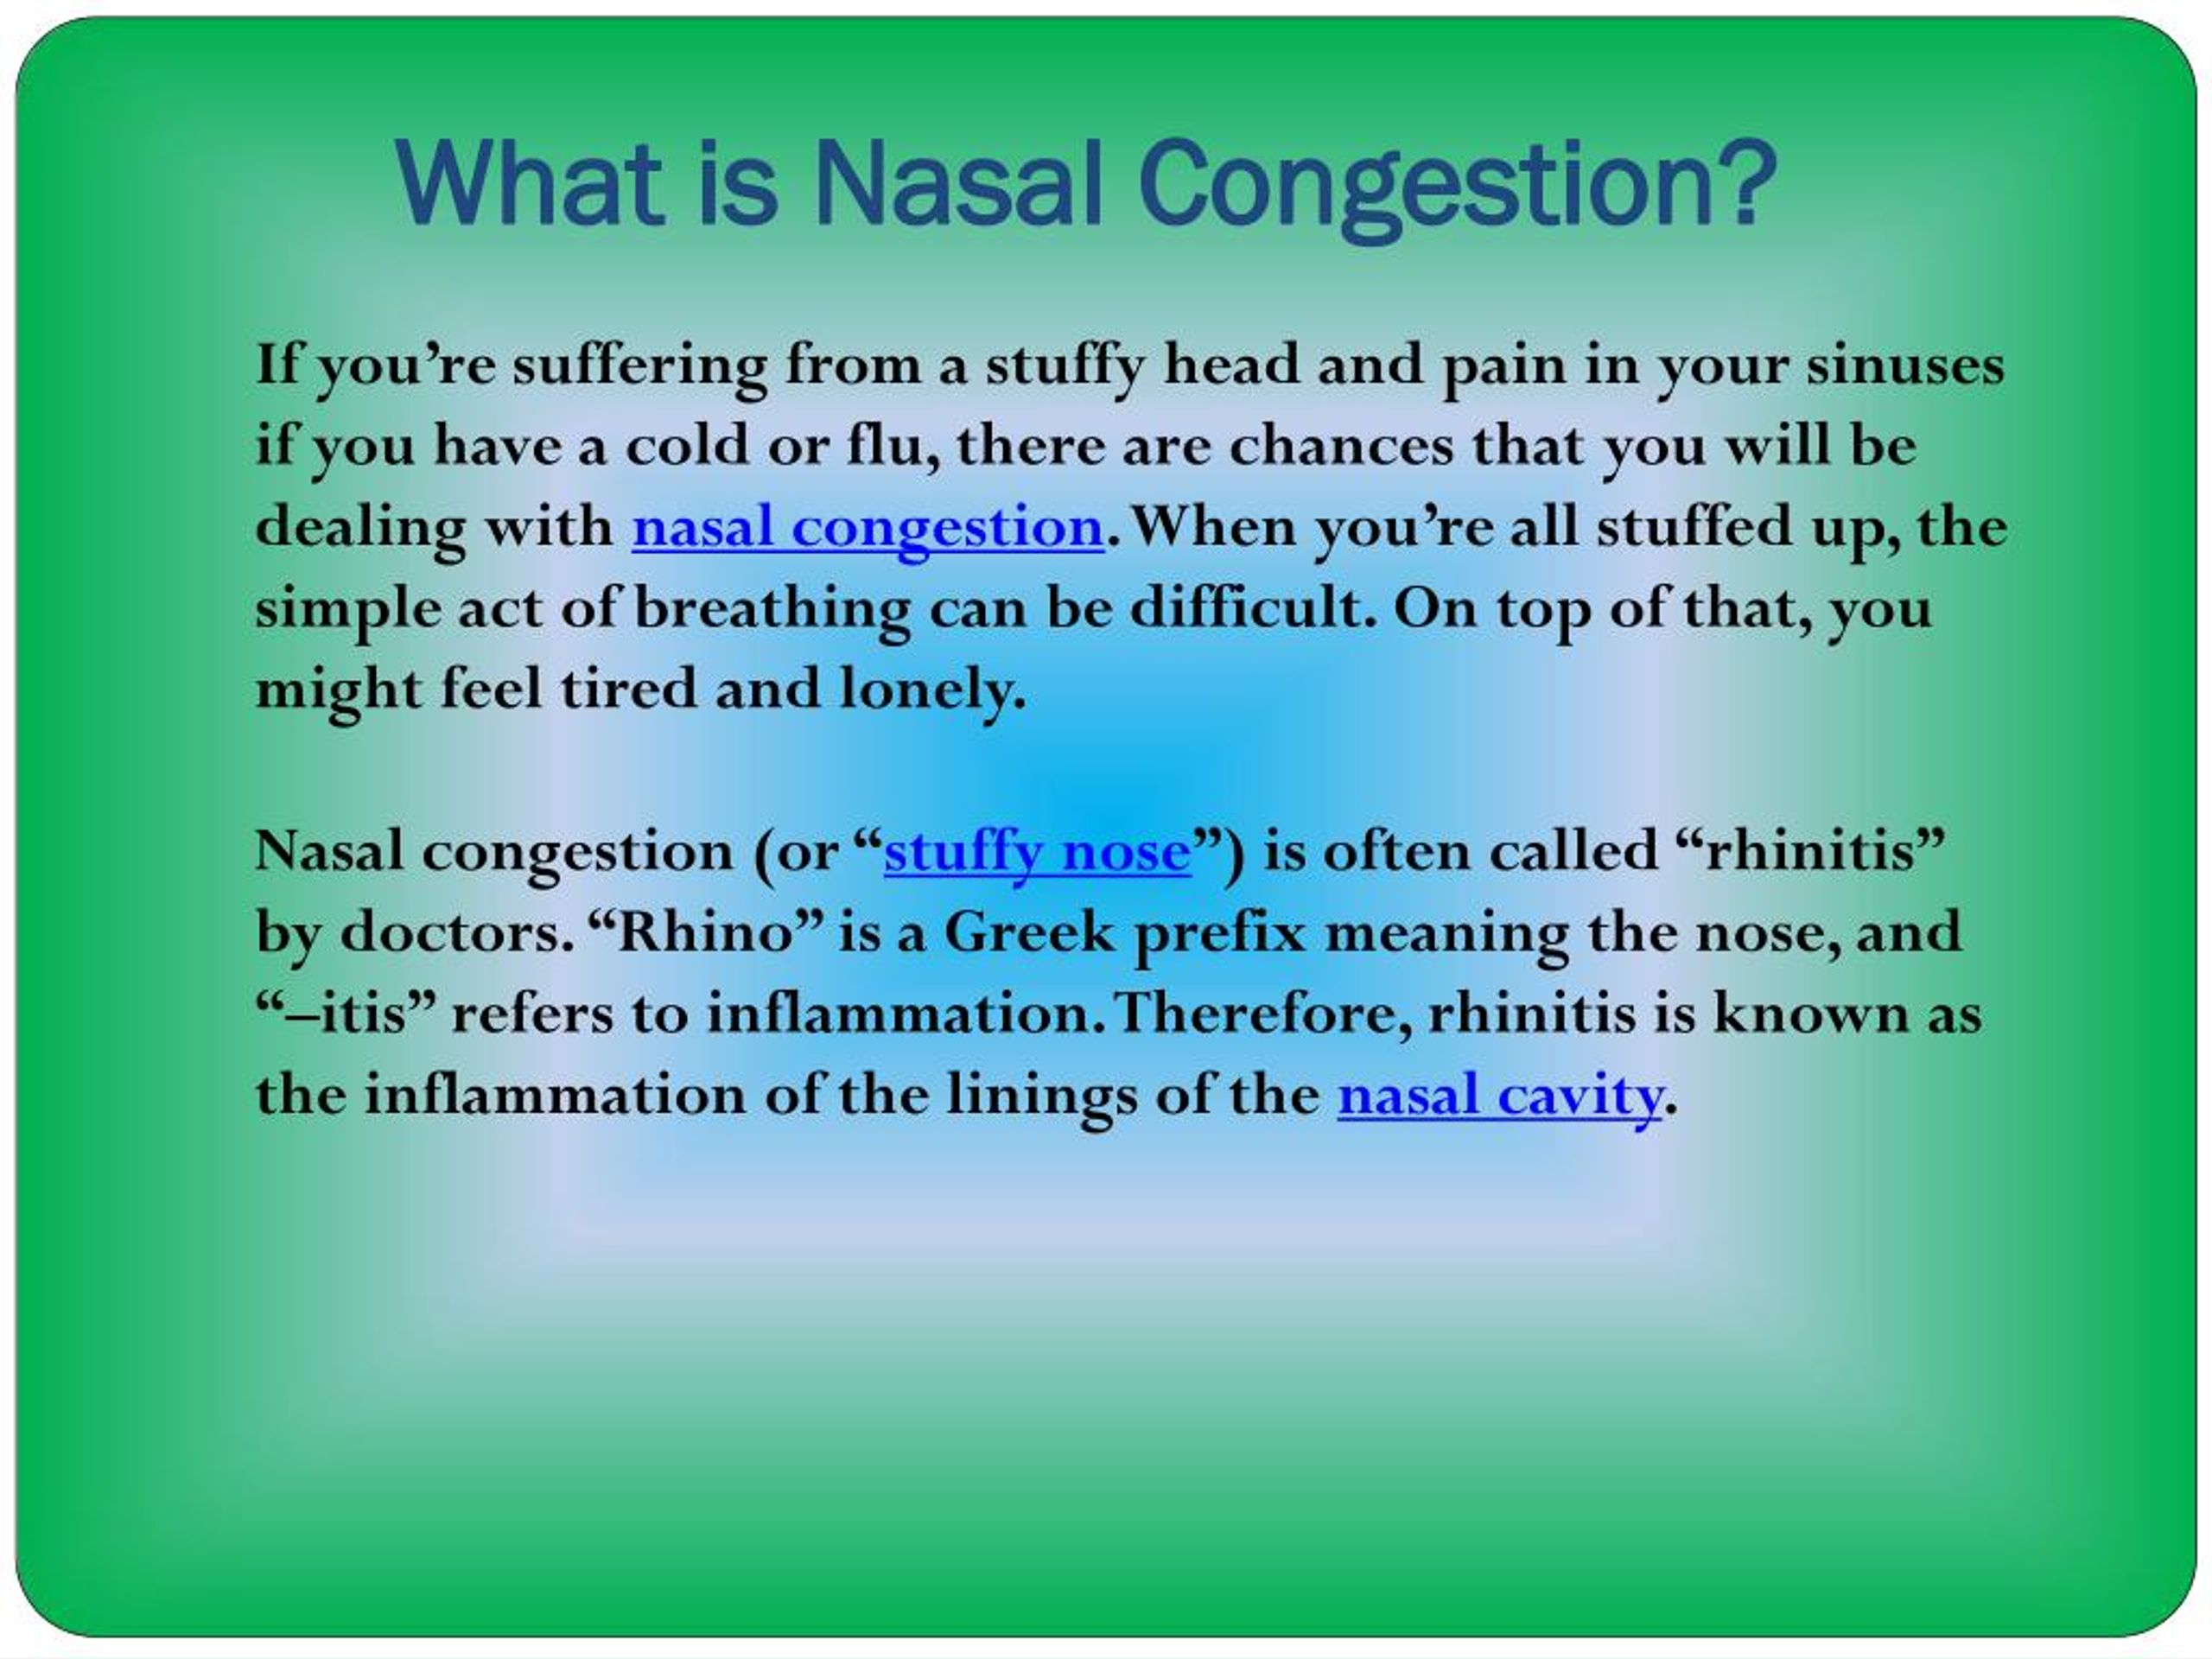 nasal congestion definition